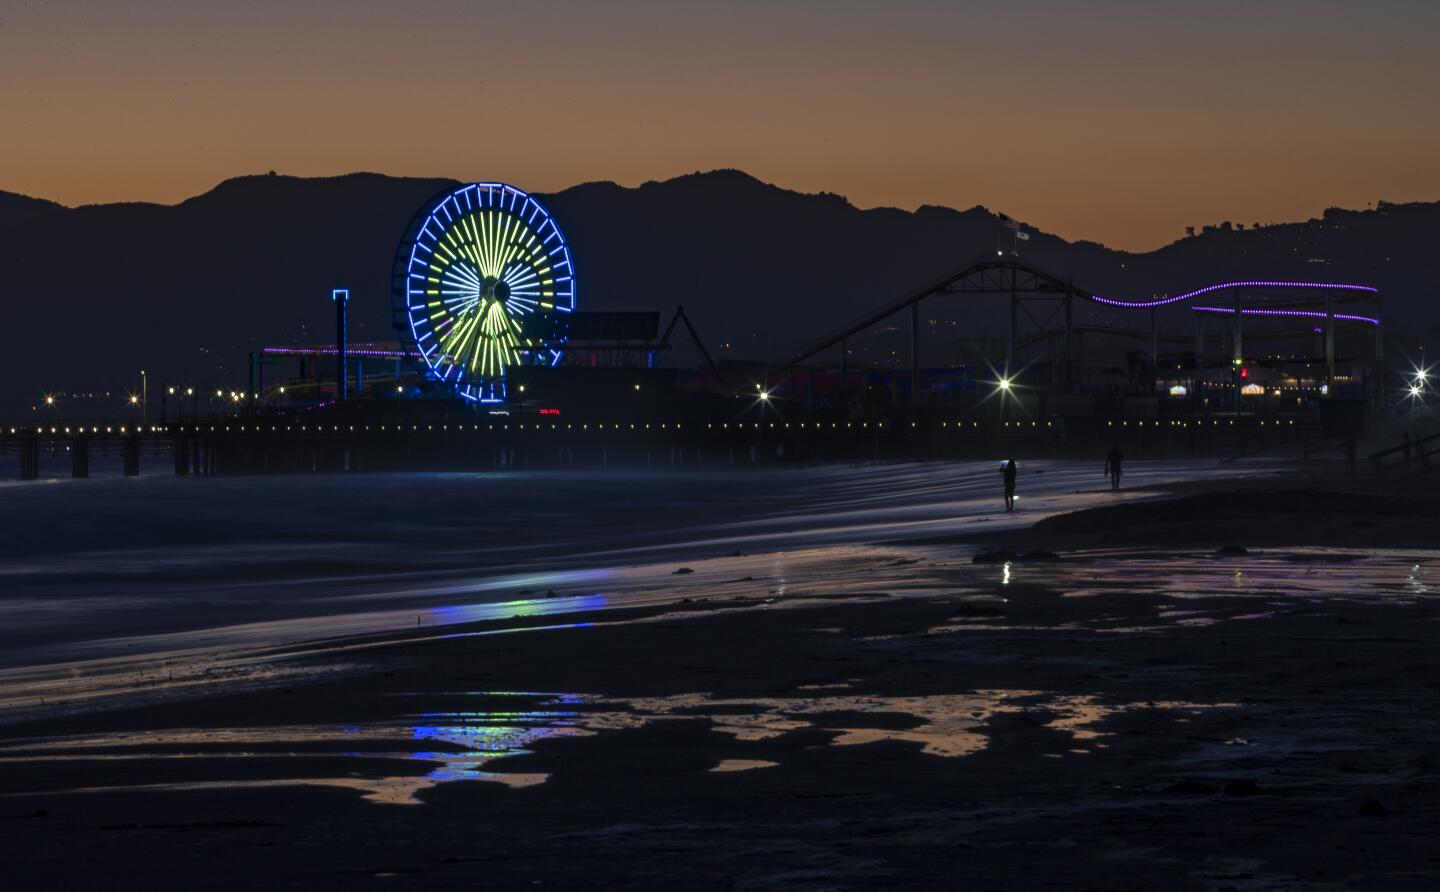 Dusk sets in over the the Santa Monica Pier on Friday.